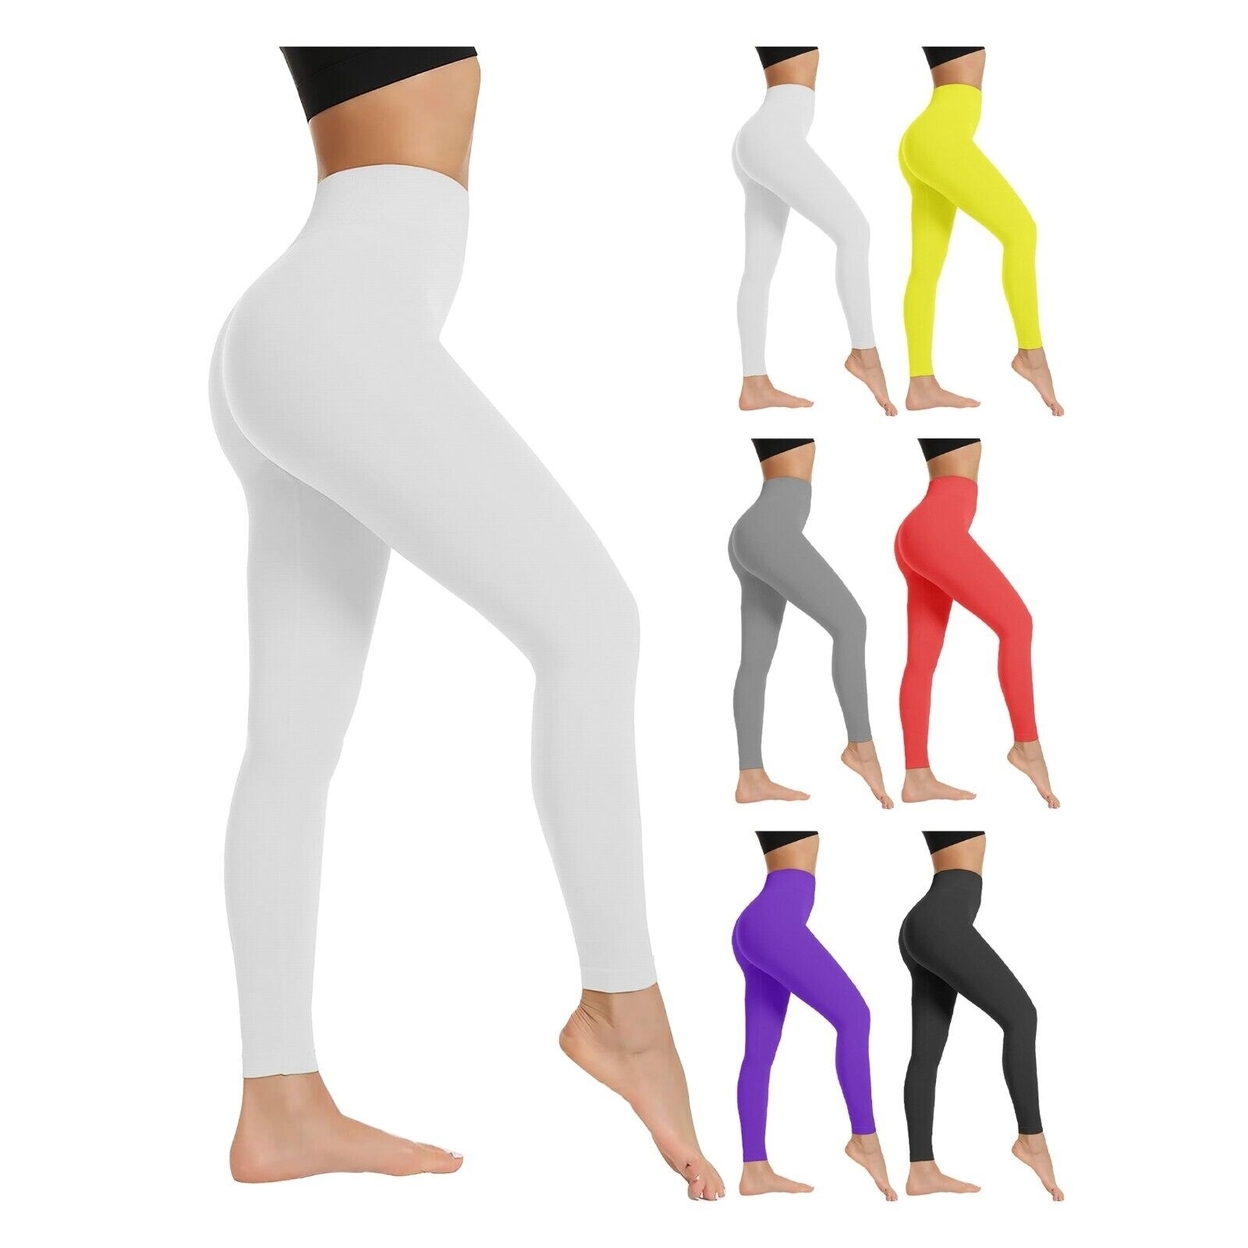 Women's High Waist Super-Soft Active Athlete Stretch Yoga Cozy Leggings - Red, X-small